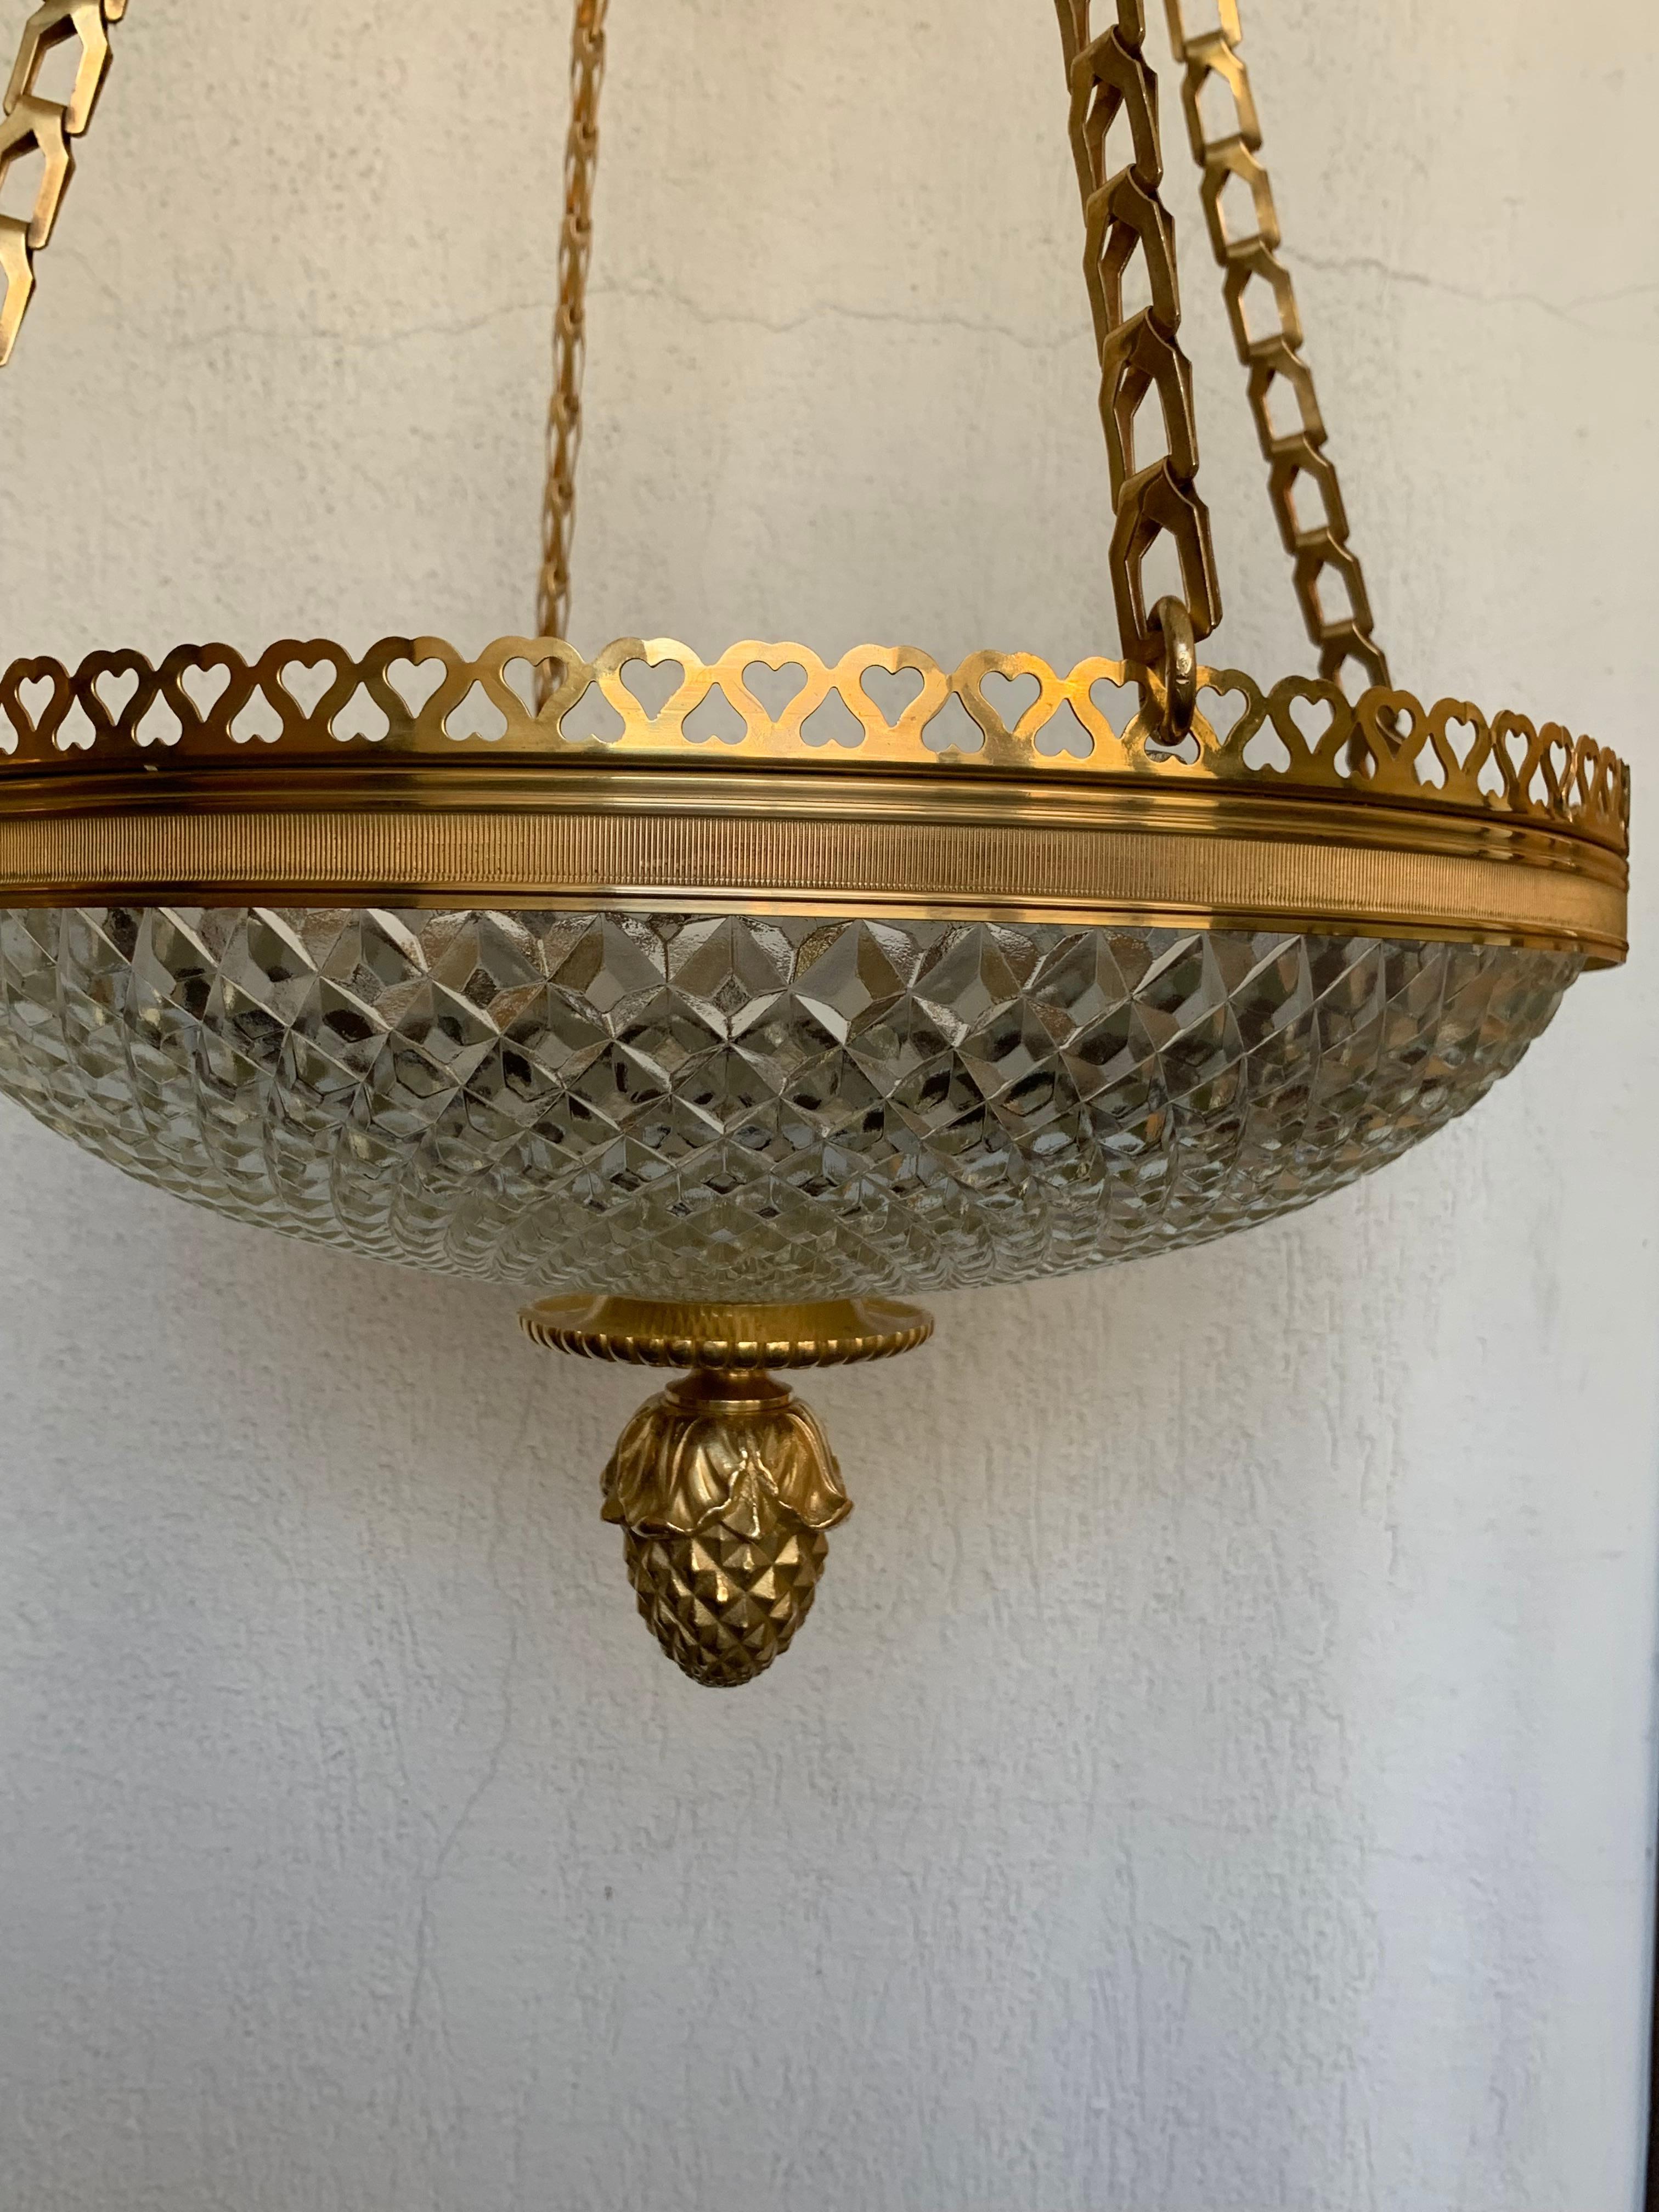 A high end decoration pair of chandelier louis XVI style in baccarat cut crystal and gilded bronze
the central crystal cup is embedded by an openwork bronze belt and ends with a finely chiseled bronze seed ,it is supported by 4 bronze chains which